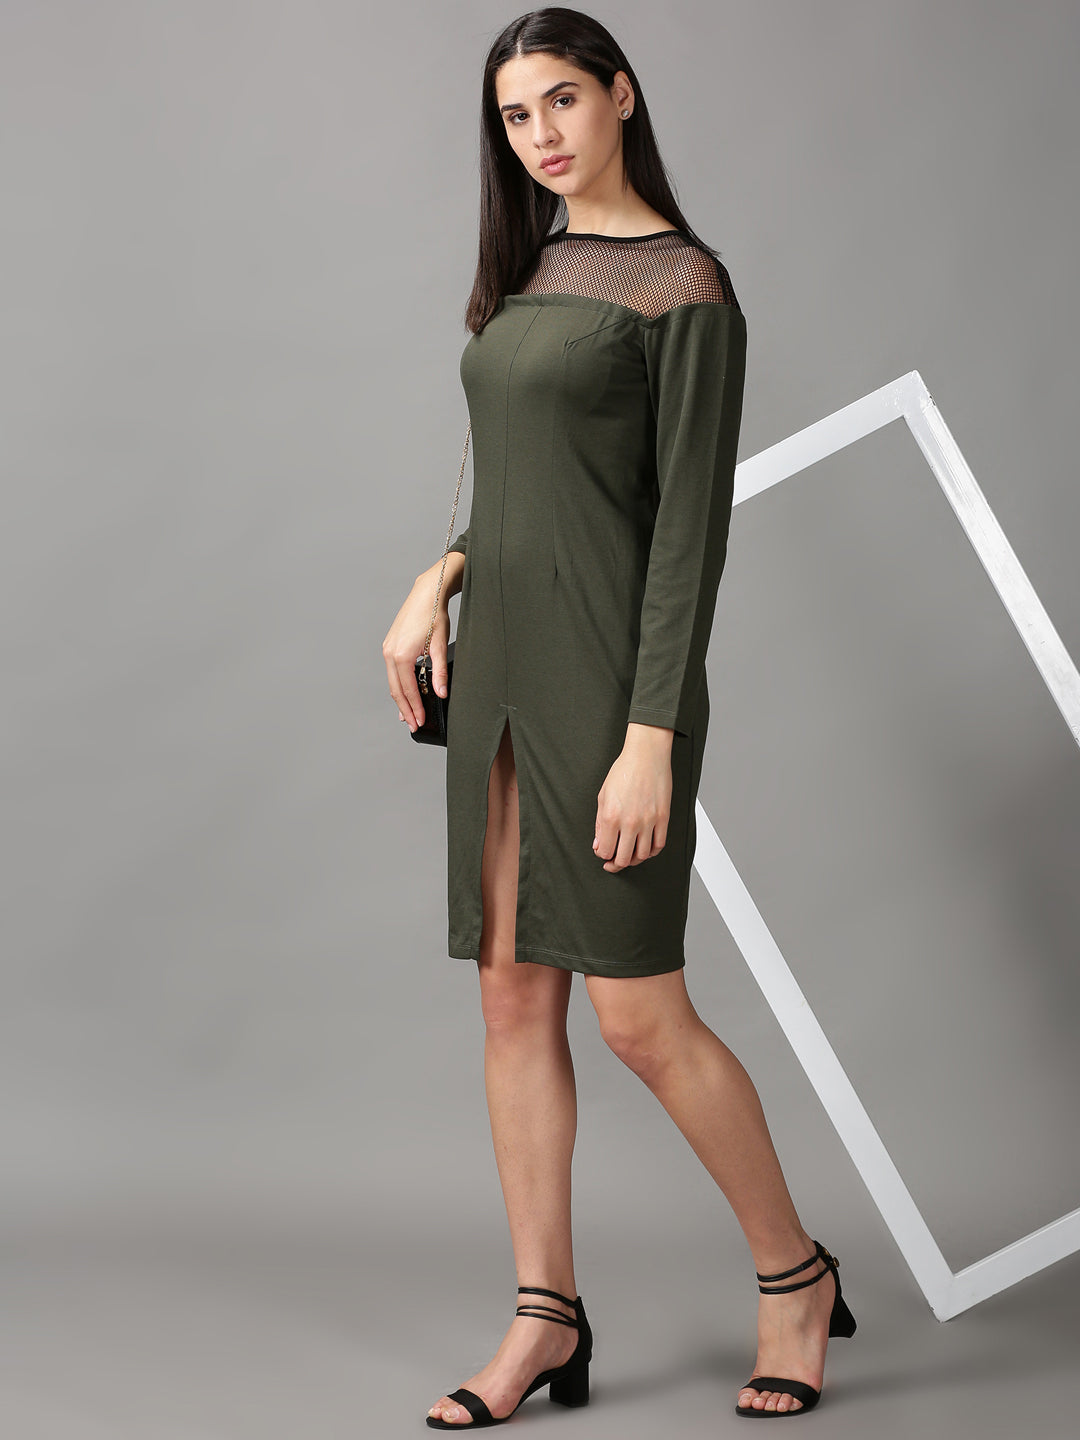 Women's Olive Solid Bodycon Dress